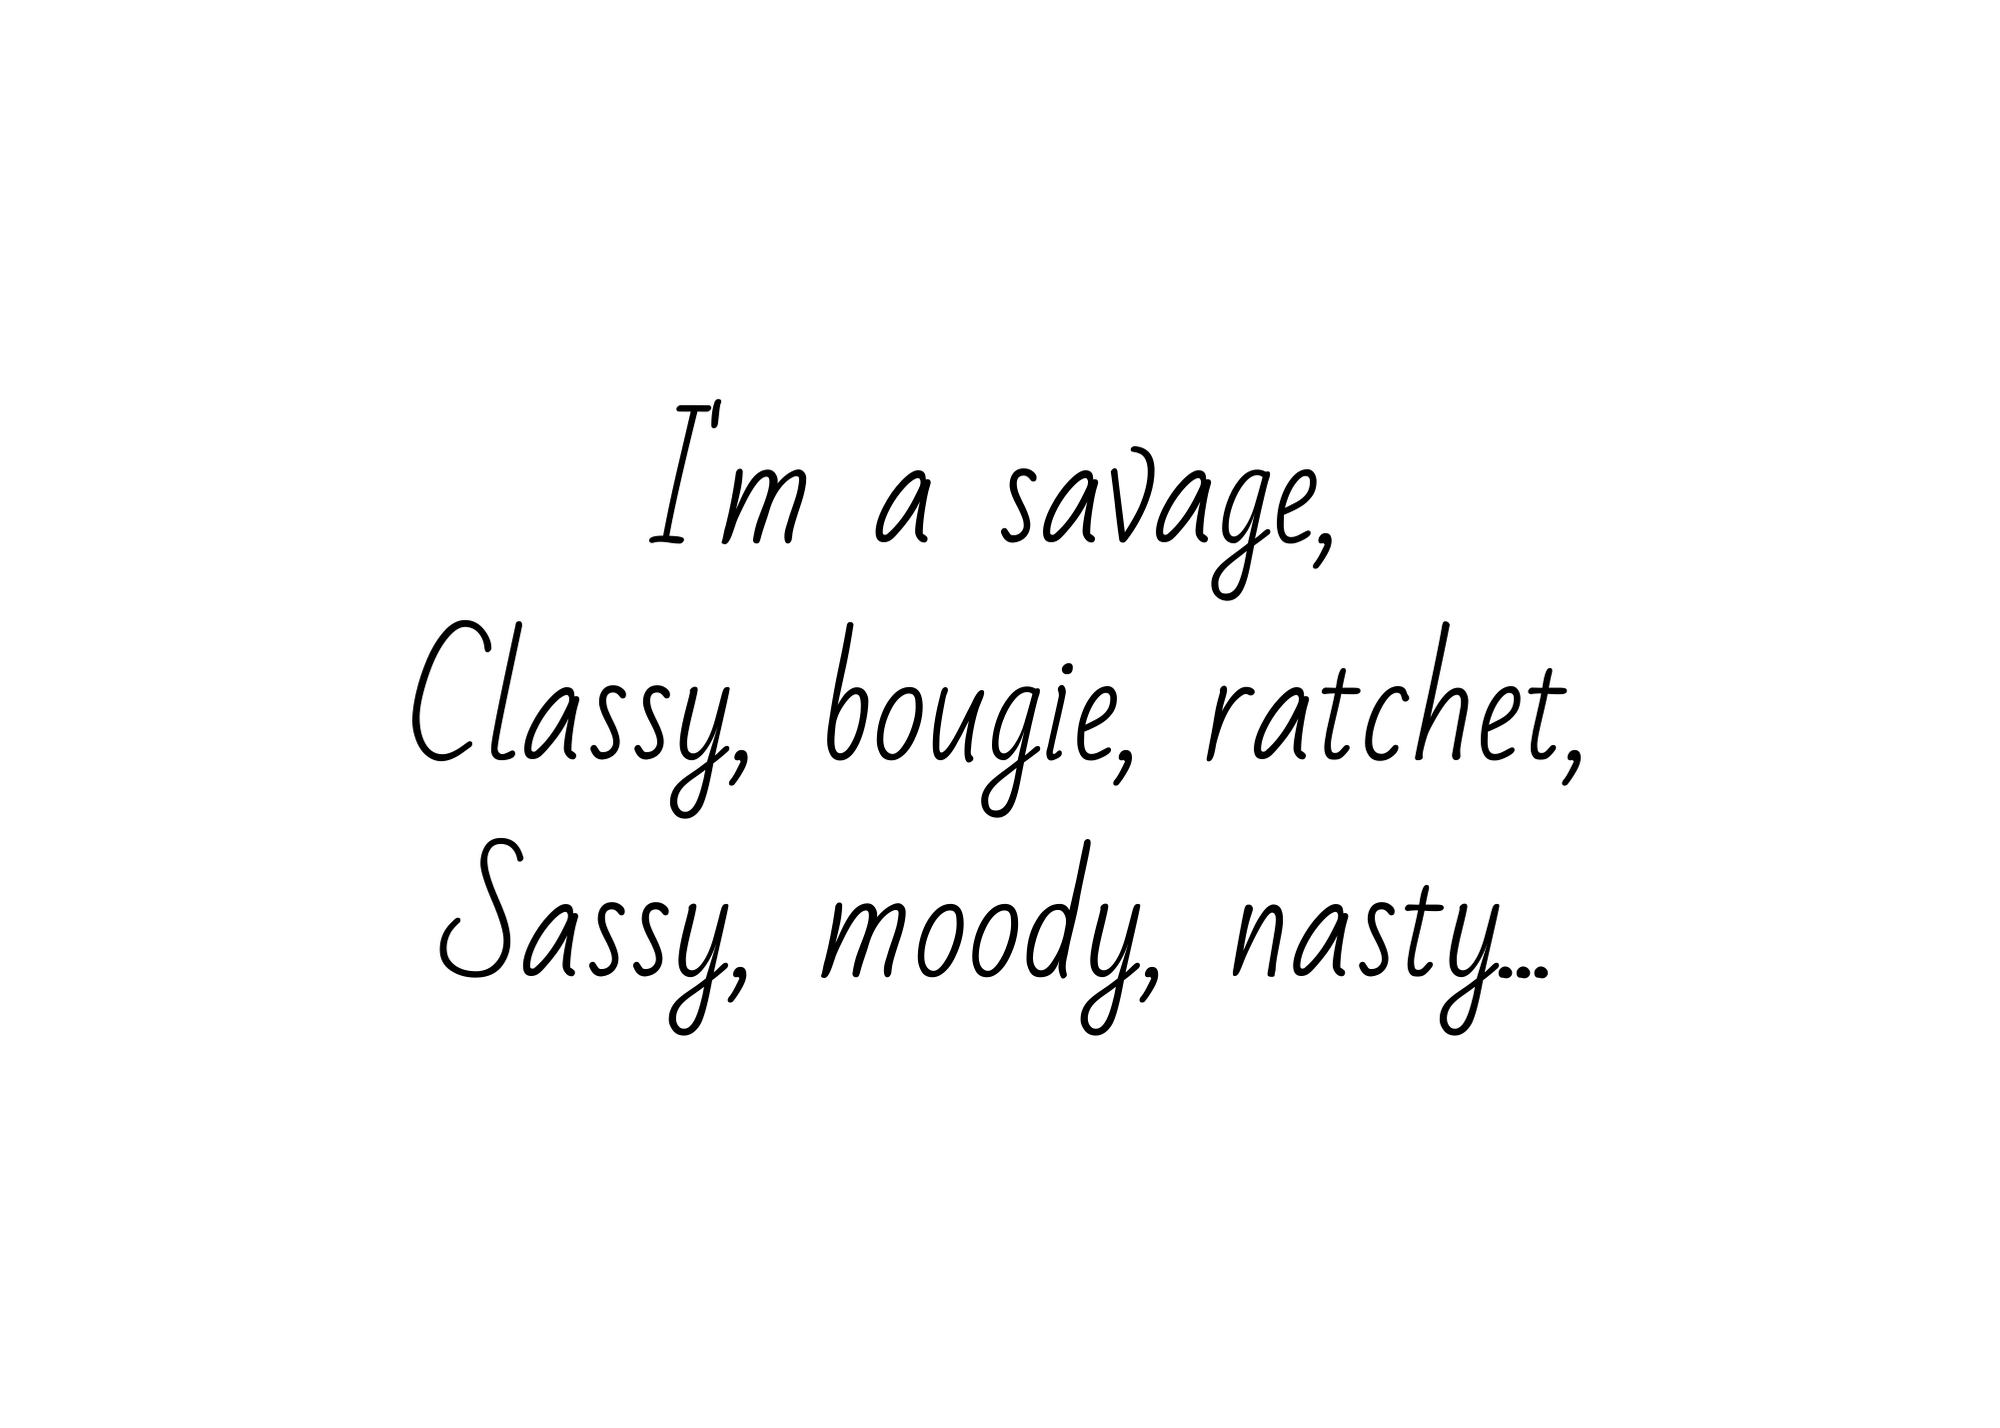 White seed paper greeting card saying "I'm a savage, Classy, bougie, ratchet, sassy, moody, nasty..."